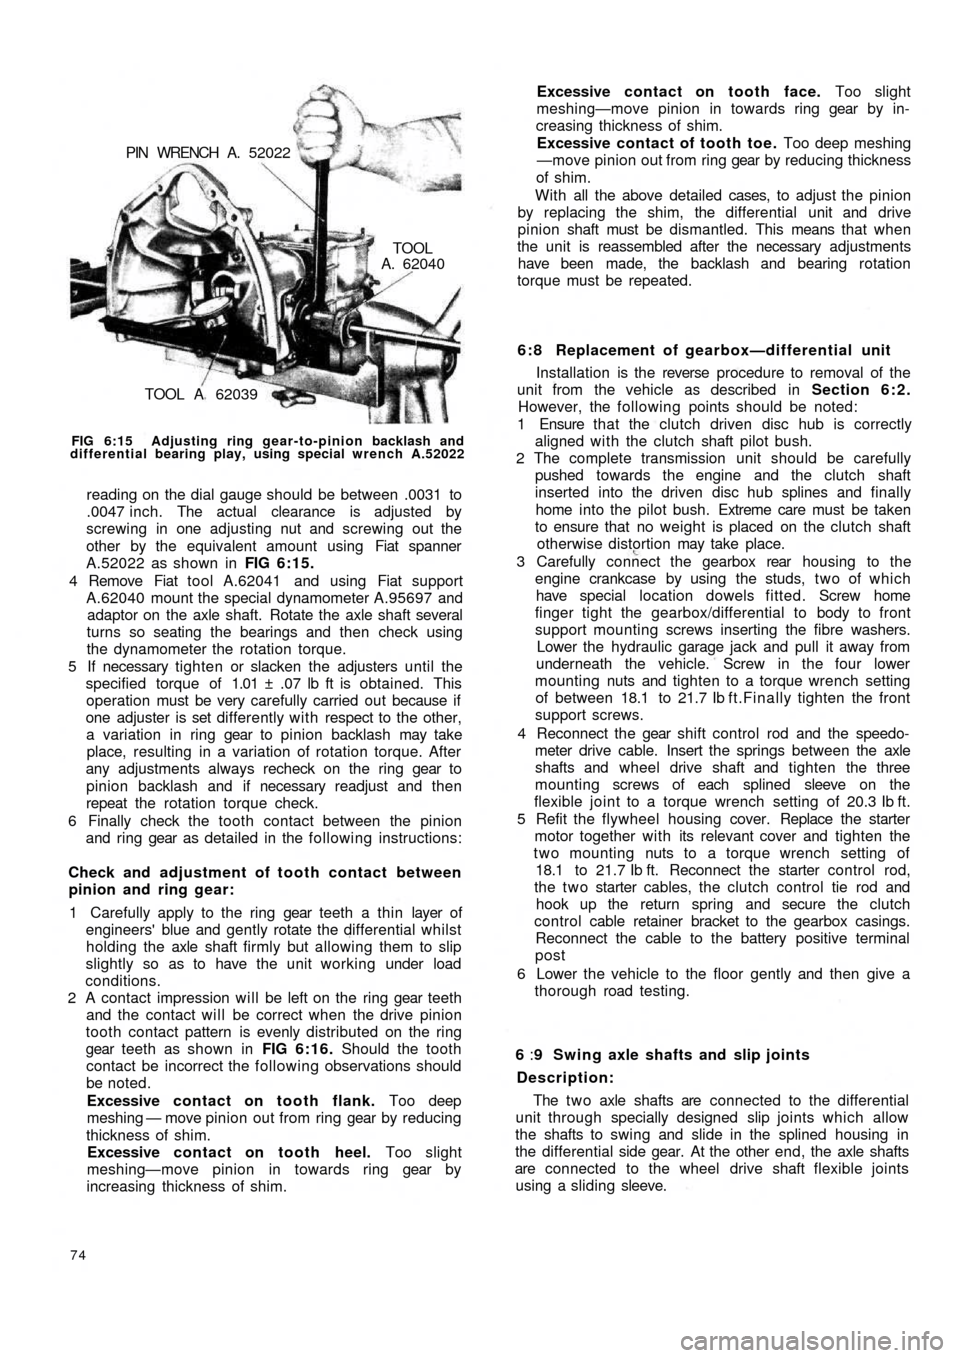 FIAT 500 1966 1.G Workshop Manual TOOL A  62039
TOOLA. 62040 PIN  WRENCH  A.  52022
FIG 6:15  Adjusting ring gear-to-pinion backlash and
differential bearing play, using special wrench A.52022
reading on the dial gauge should be betwe